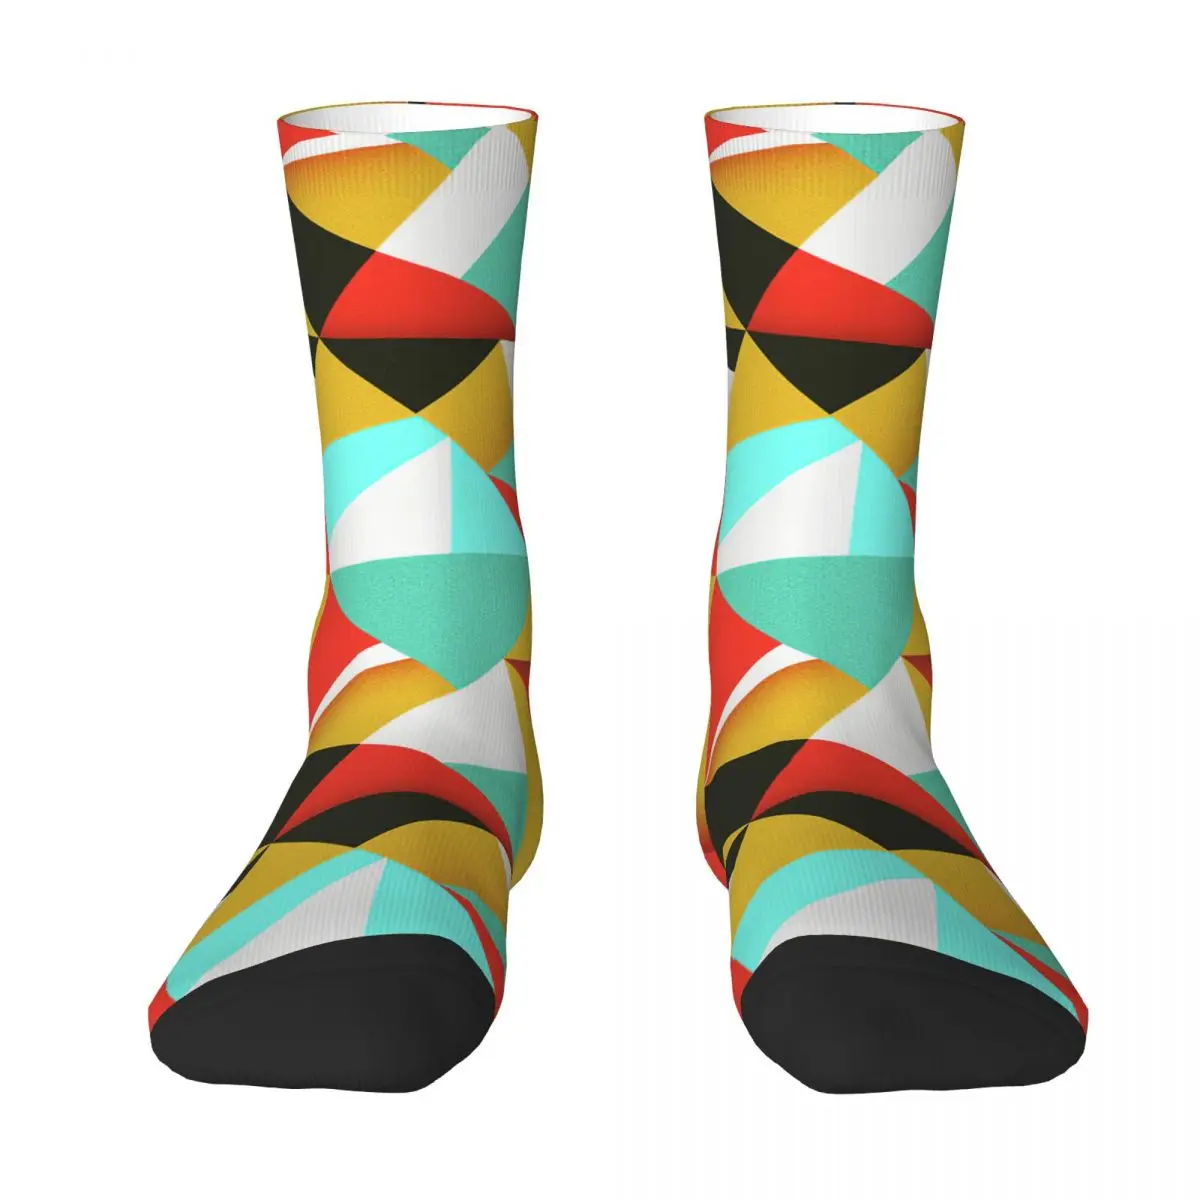 Seamless Colorful Abstract Retro Shapes Adult Socks,Unisex socks,men Socks women Socks colorful casual women soft thick warm socks rabbit wool blends warm winter socks women retro style colorful breathable socks